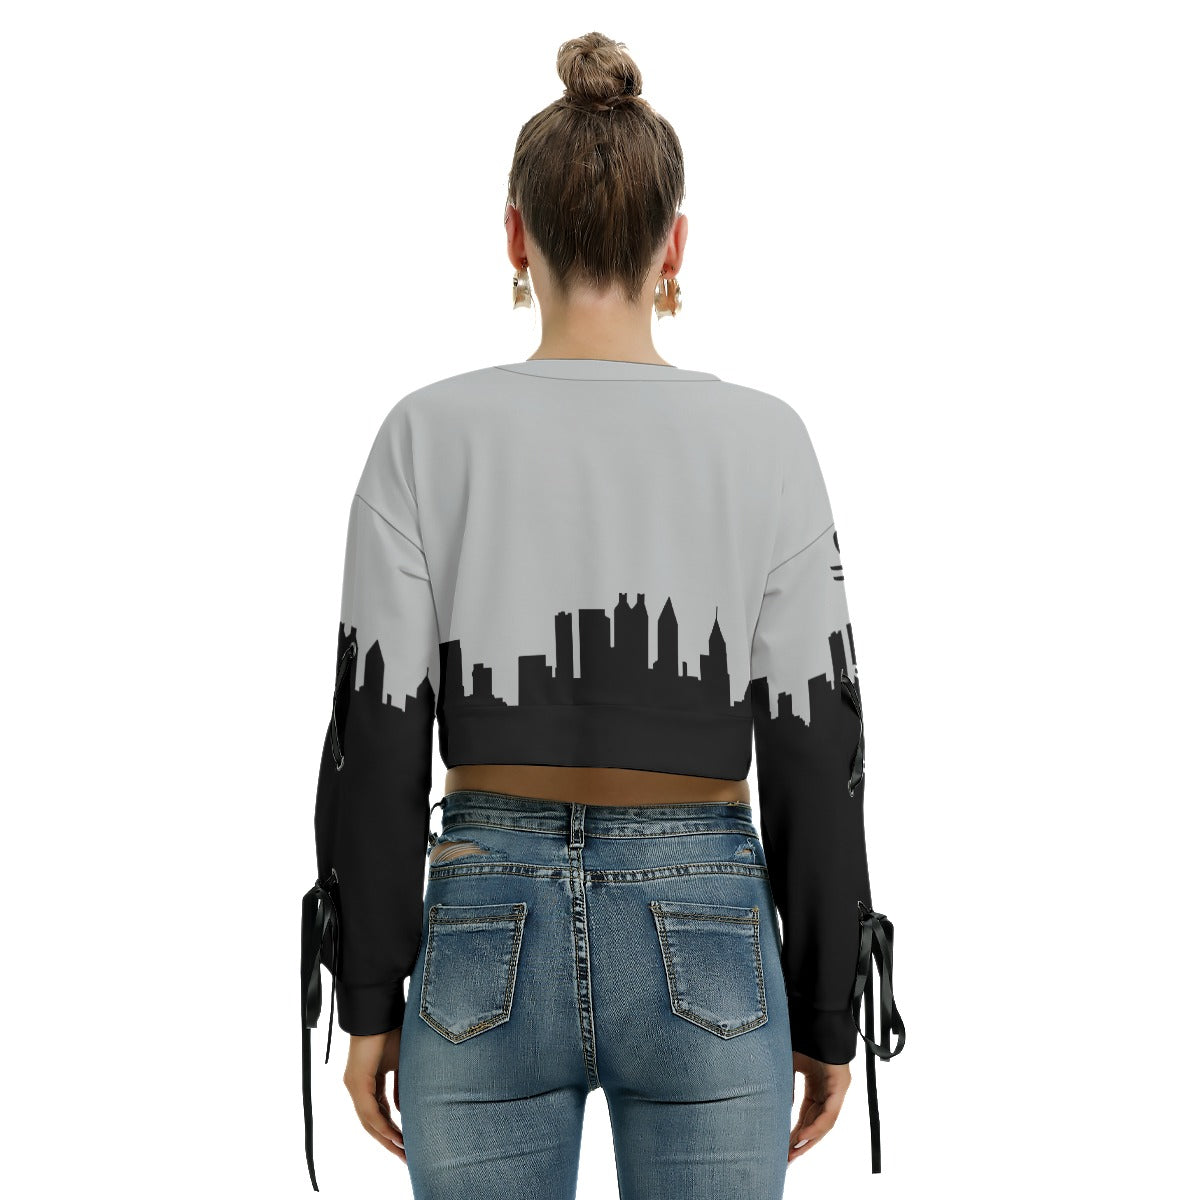 Officially Sexy Light Grey & Black Skyline Collection Women's Long Lace up Sleeve Cropped Sweatshirt